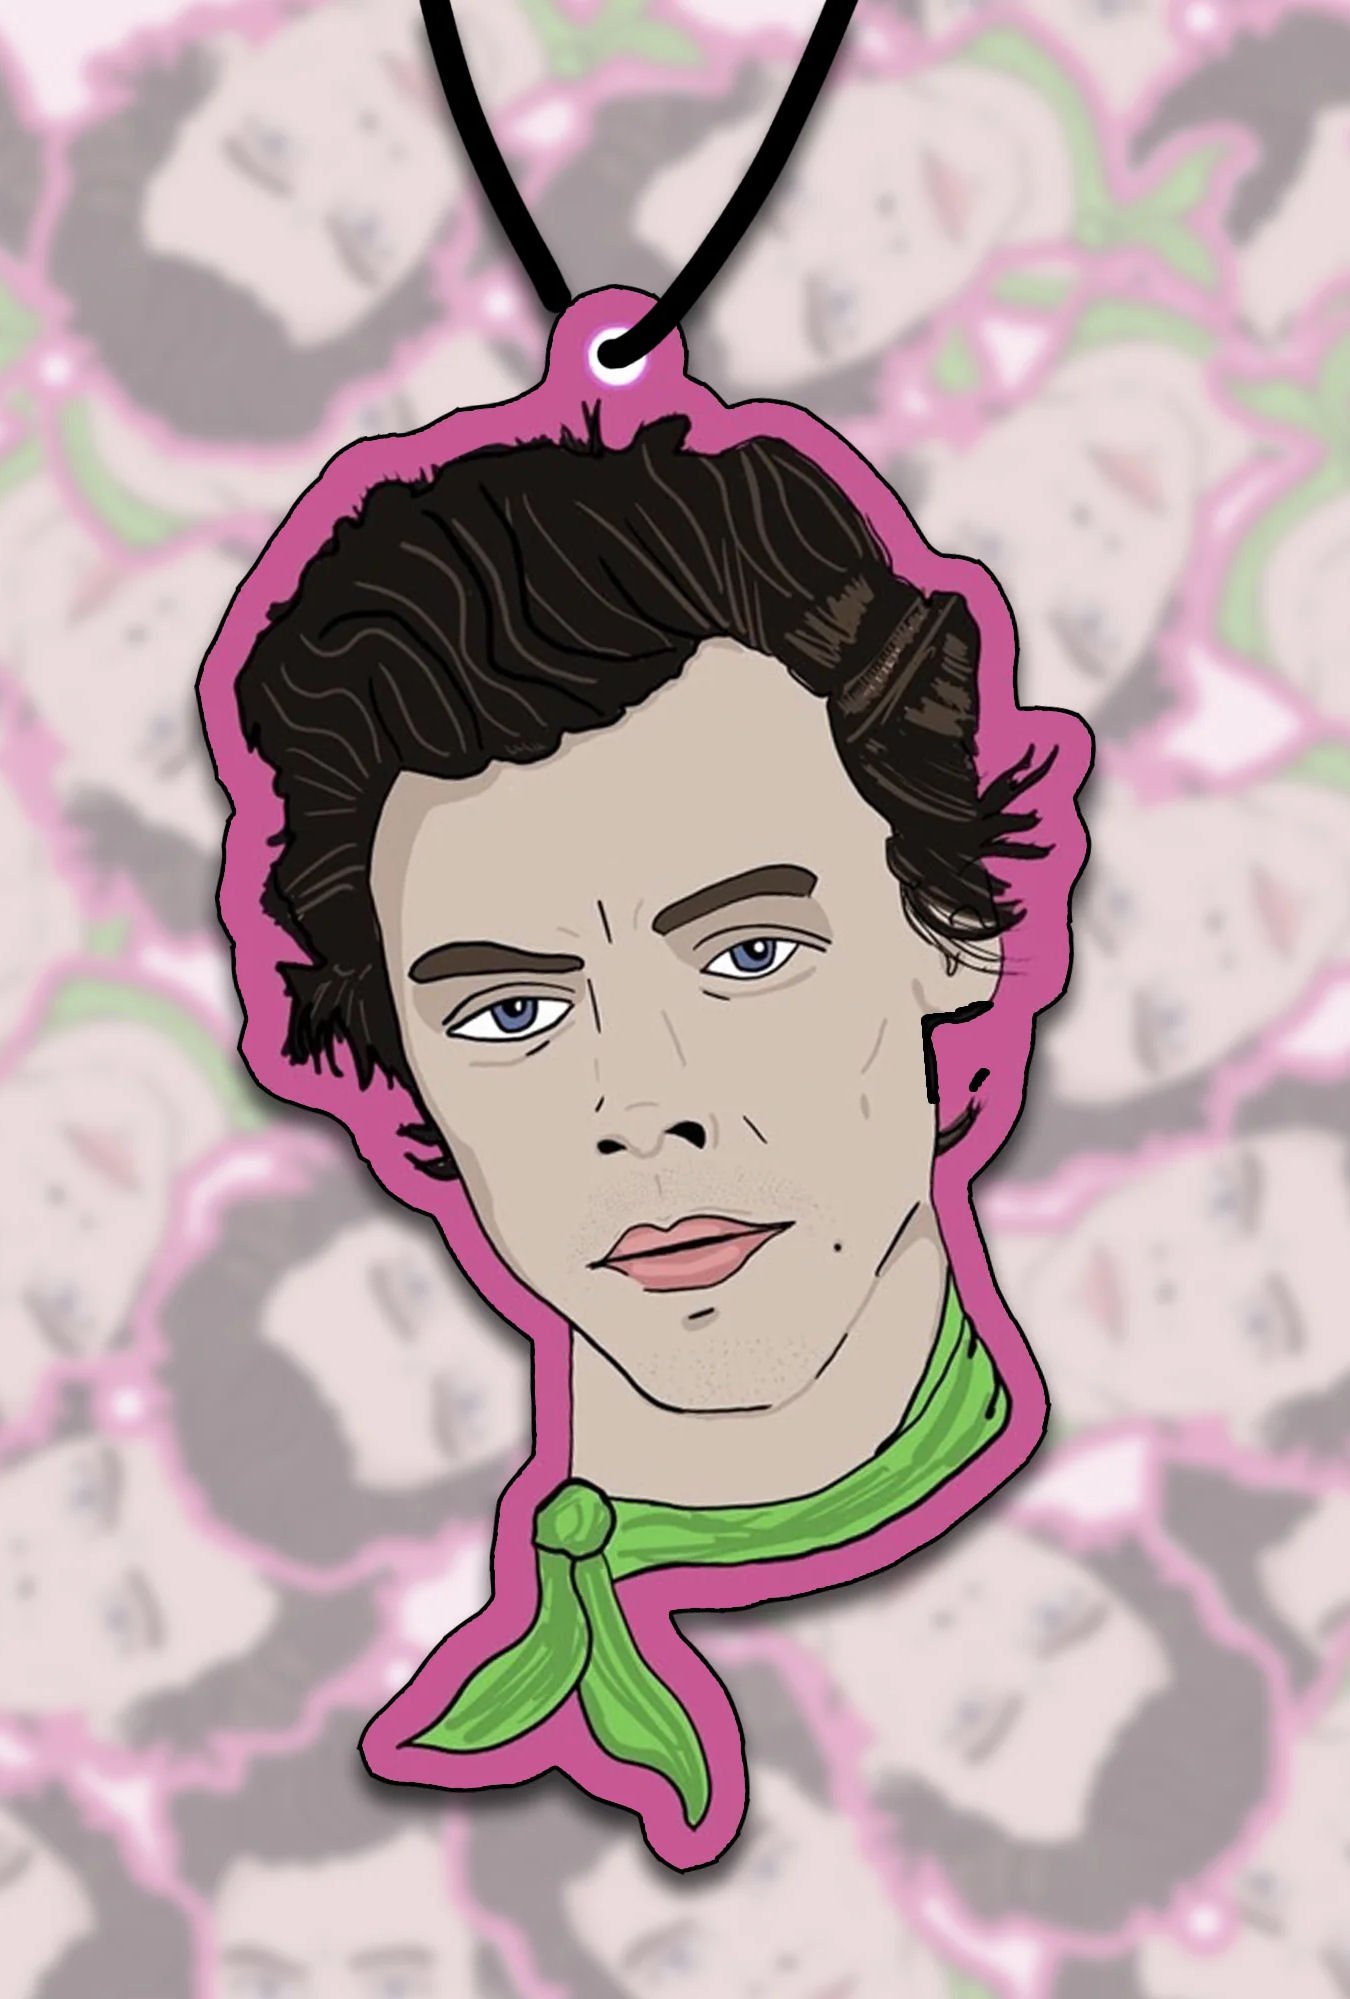 Harry Styles Watermelon Air Freshener — Lost Objects, Found Treasures